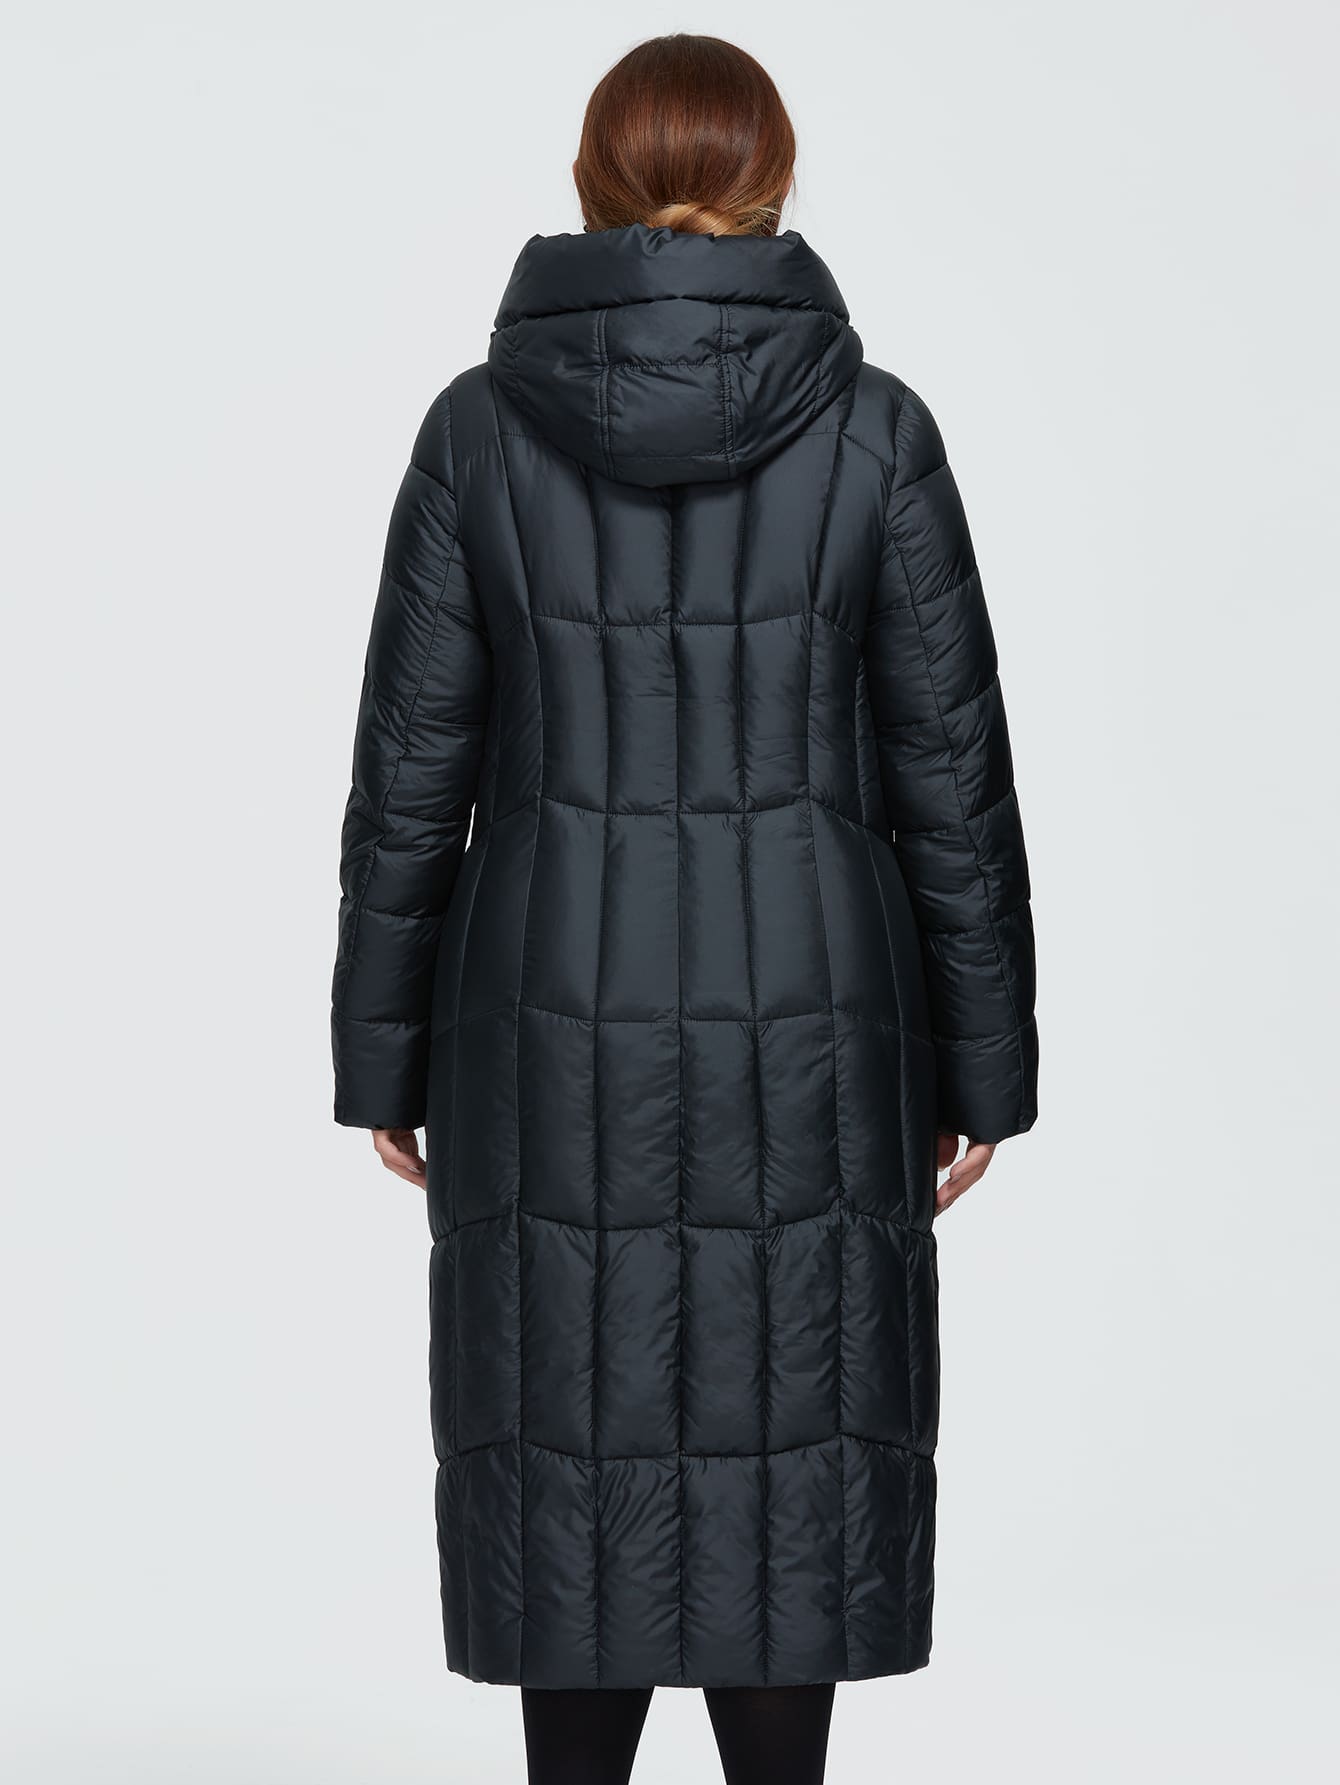 Plus Zip-Up Pocket Side Hooded Puffer Coat: Embrace Superior Style and Winter Warmth